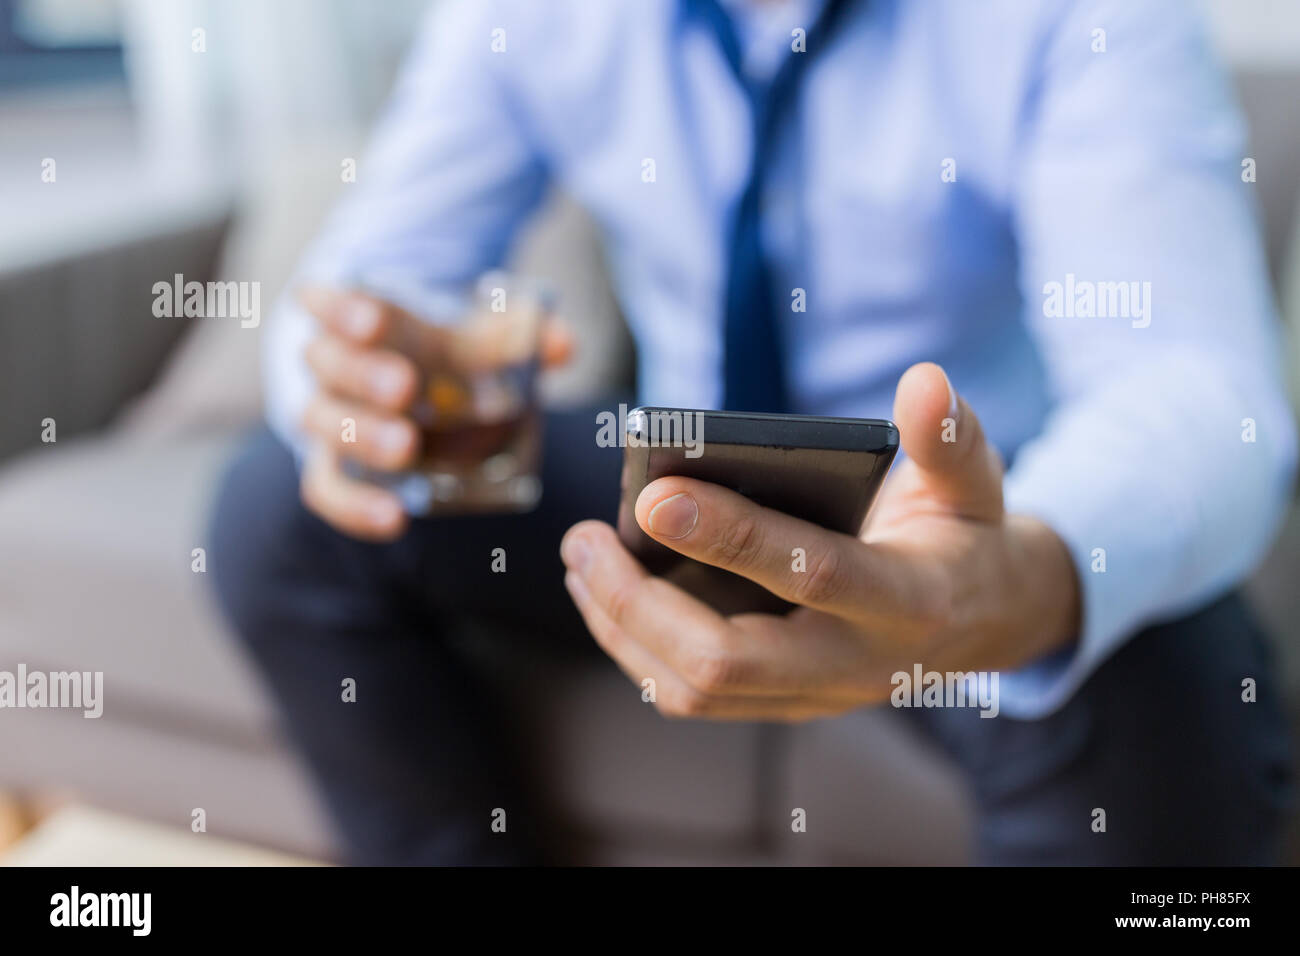 man with smartphone and glass of alcohol at home Stock Photo